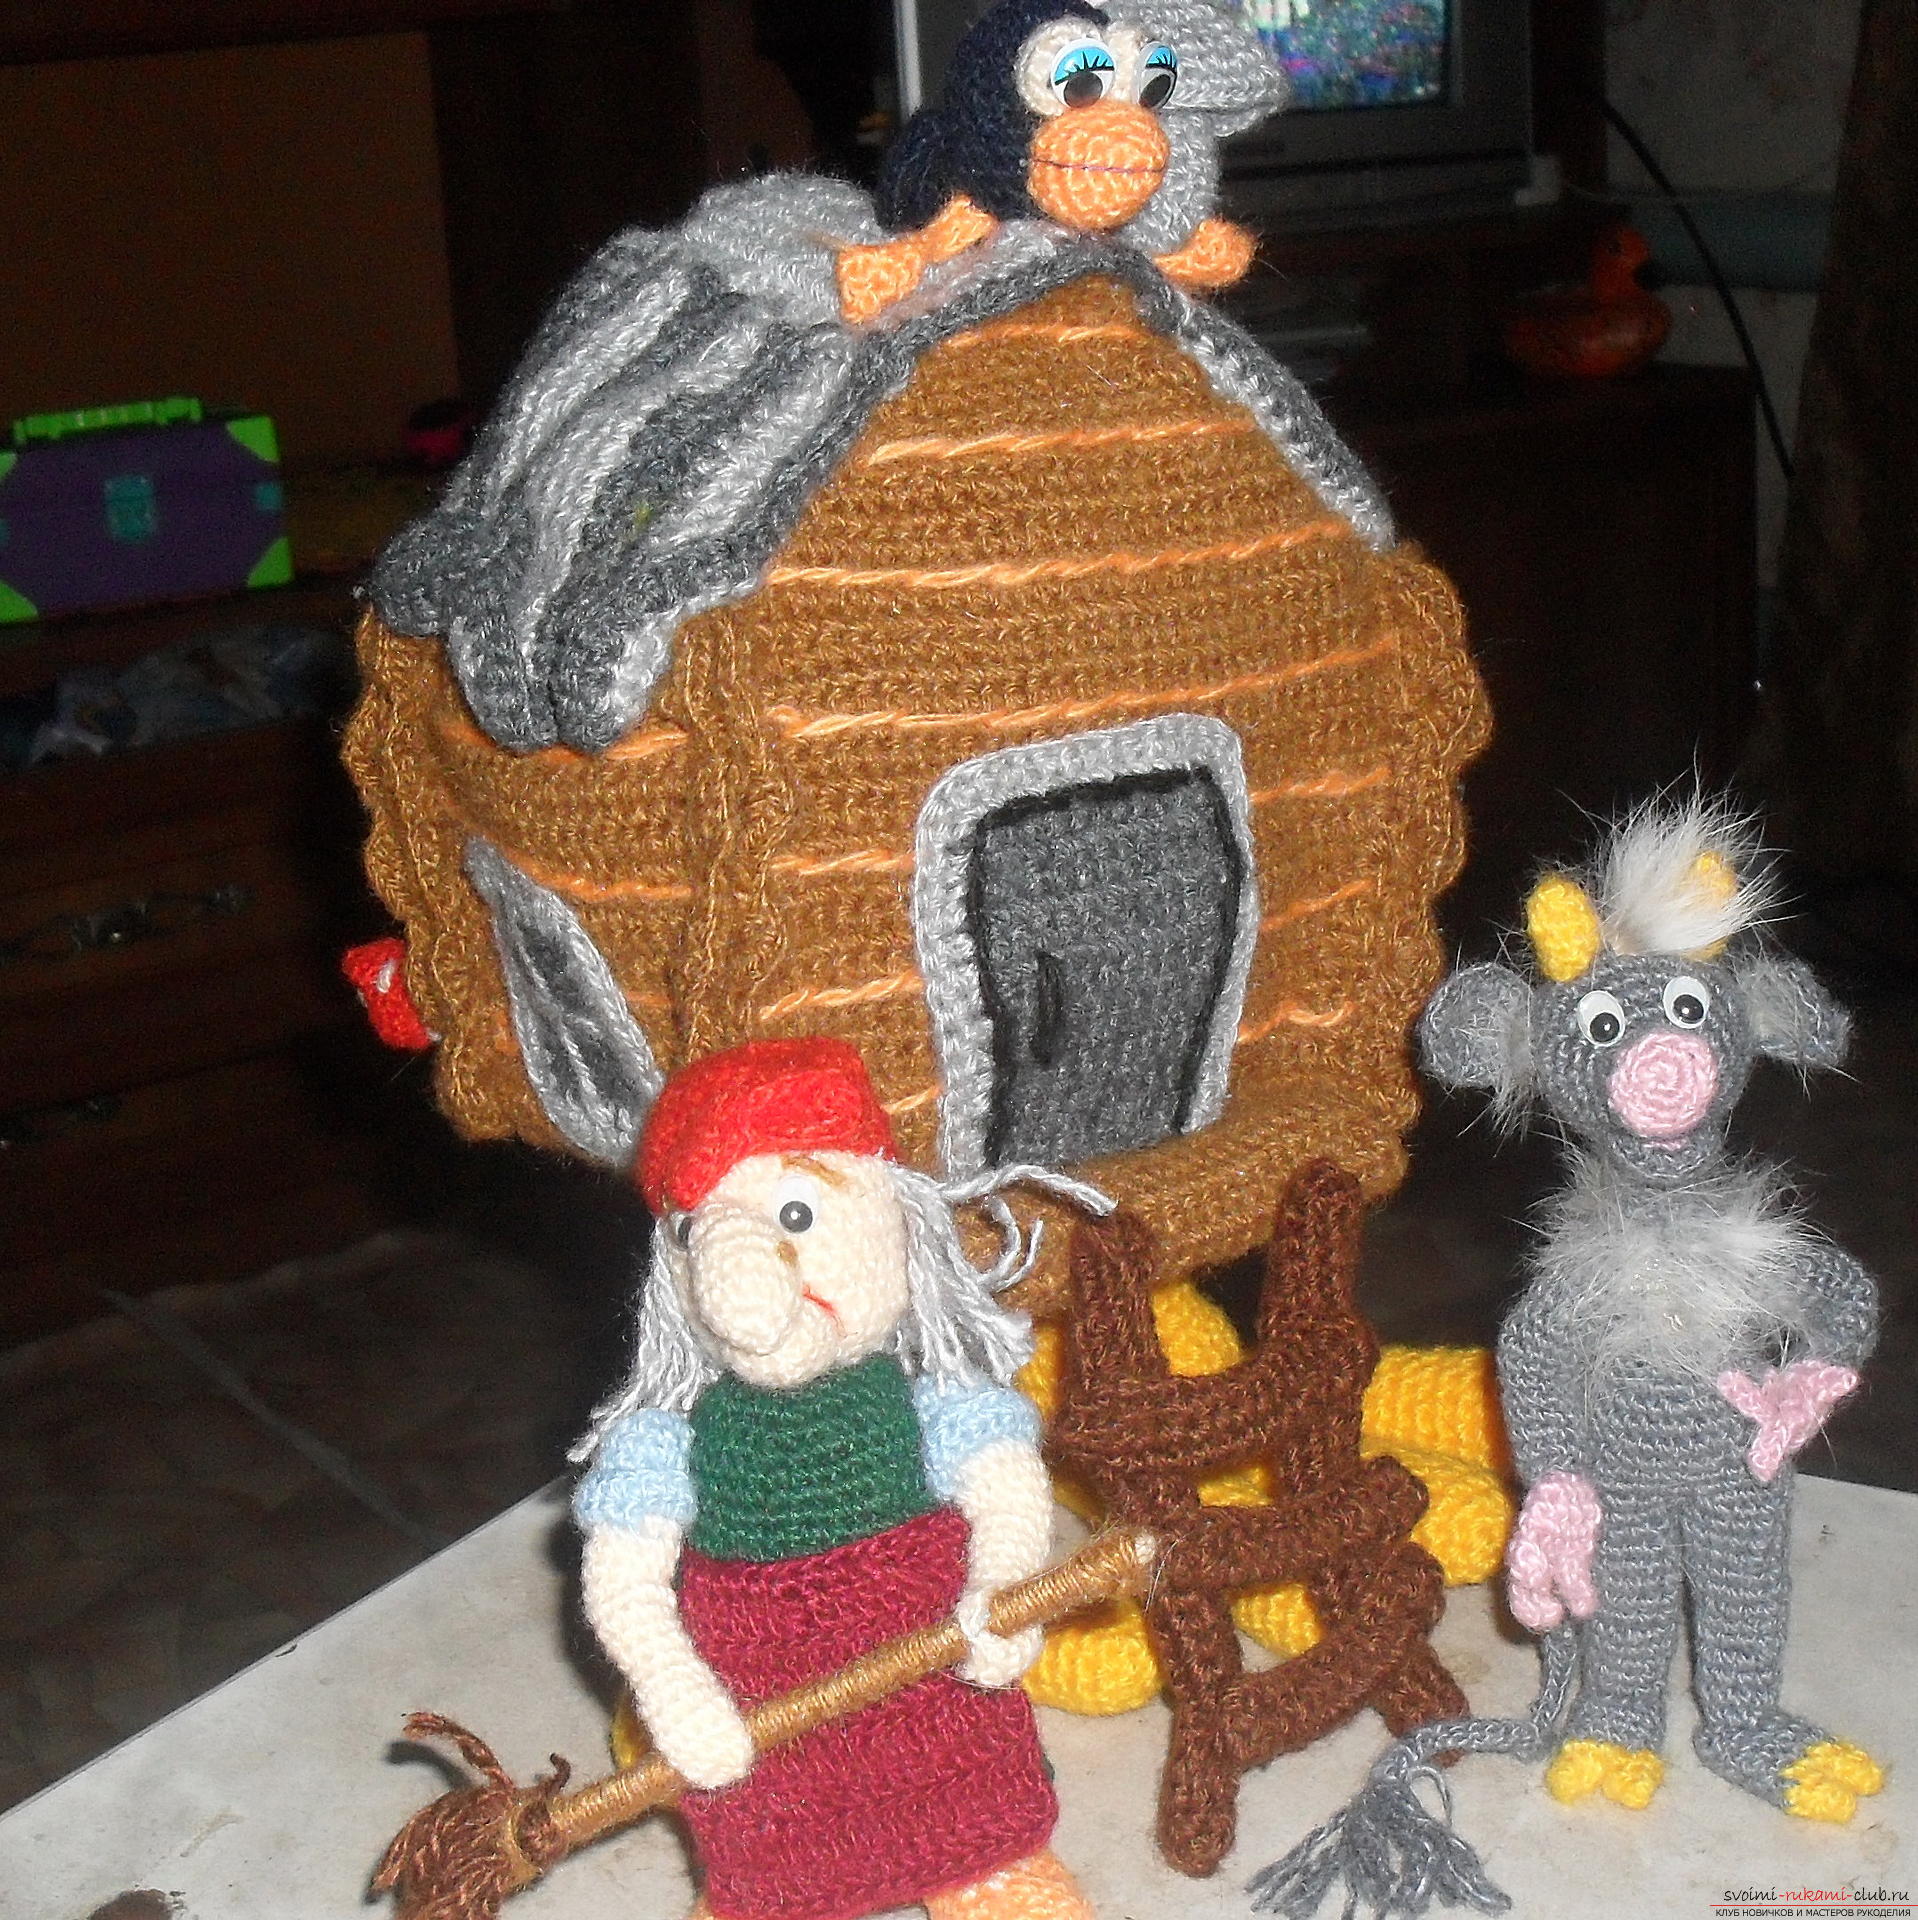 Fairy-tale heroes - the dream of any child, knitted toys in the form of a yaga woman, Banyun's cat will appeal to many children. Crochet crochet toys are created quickly and in any color .. Photo №1